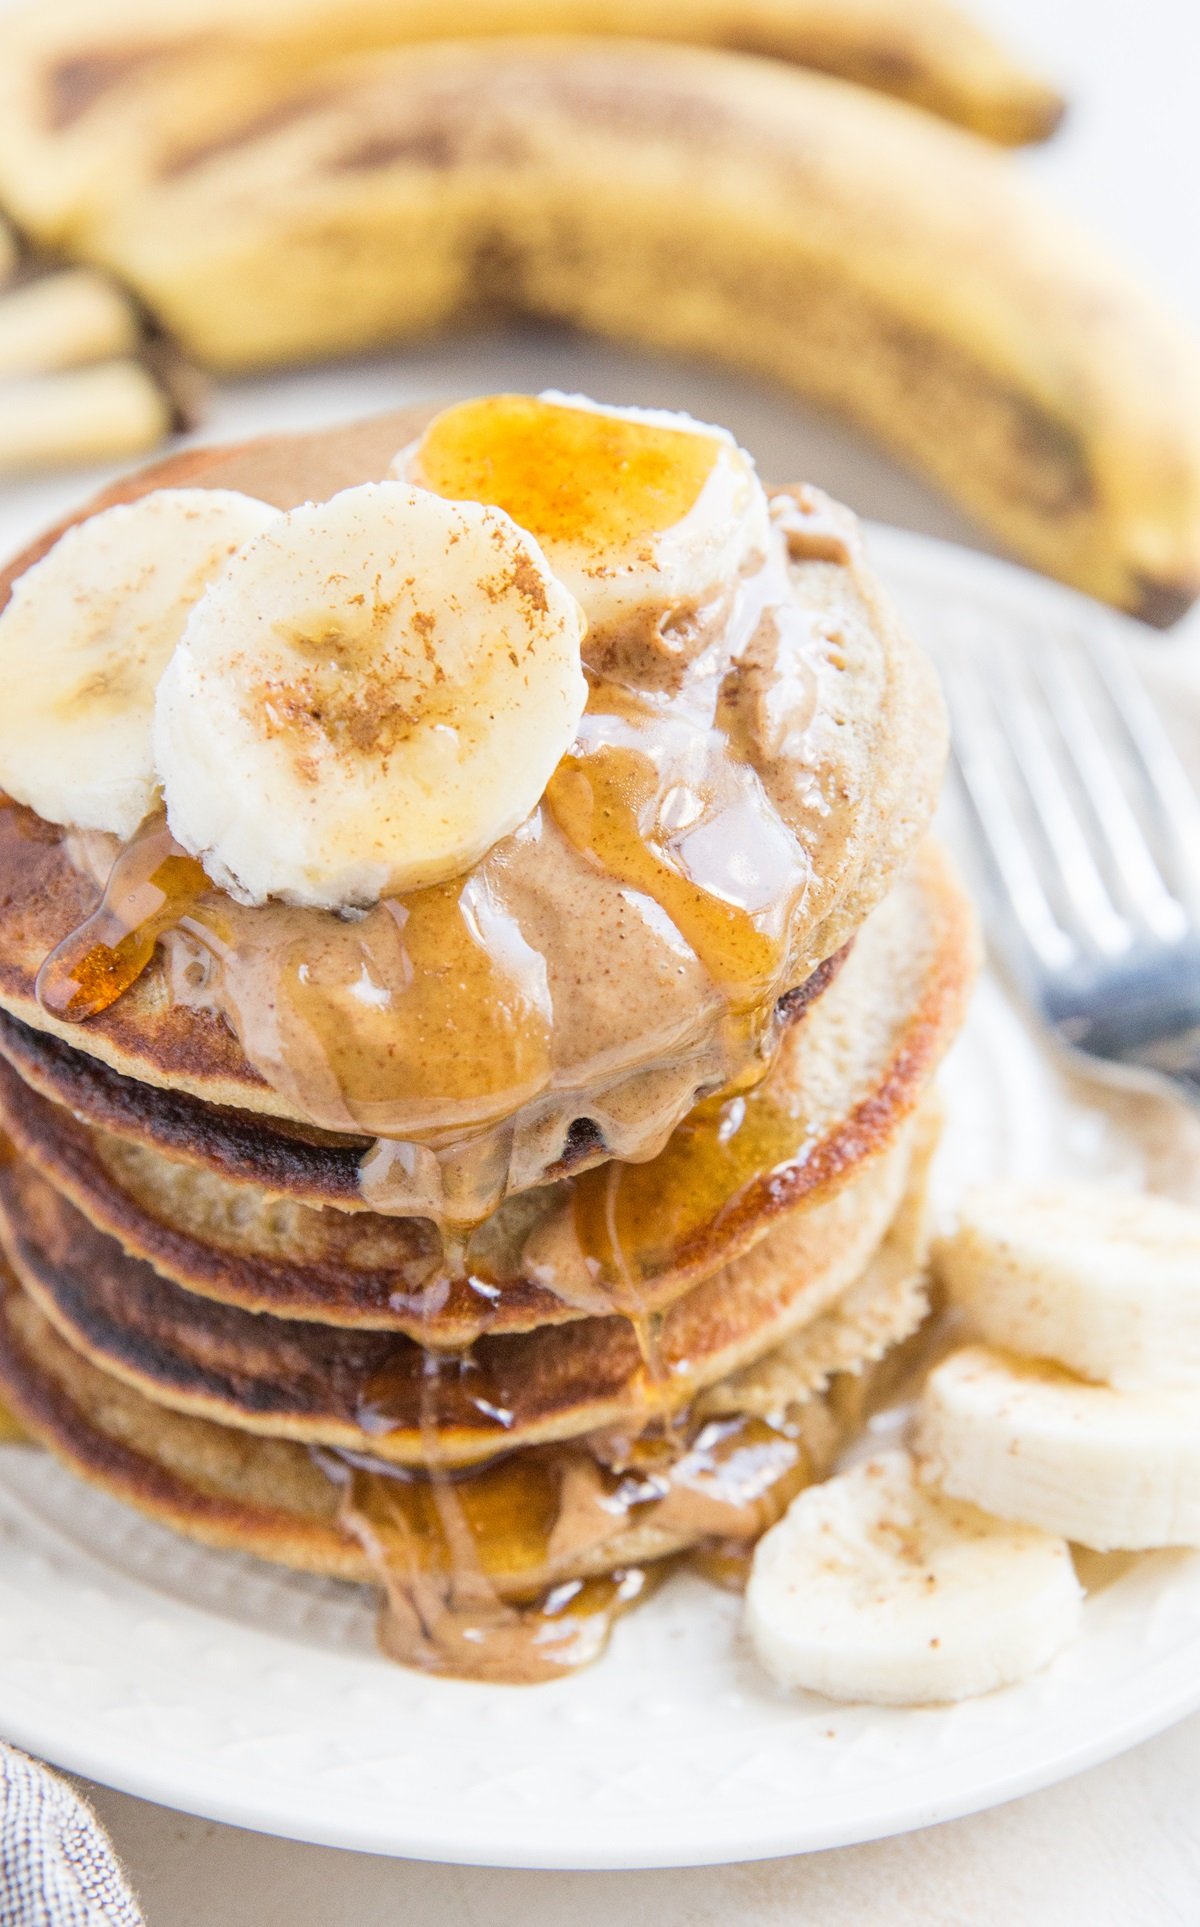 Flourless Oatmeal Banana Pancakes made with only 6 ingredients! These moist, fluffy, sweet and cinnamon pancakes make a delicious healthy gluten-free breakfast and are awesome for serving kids and guests of all ages.